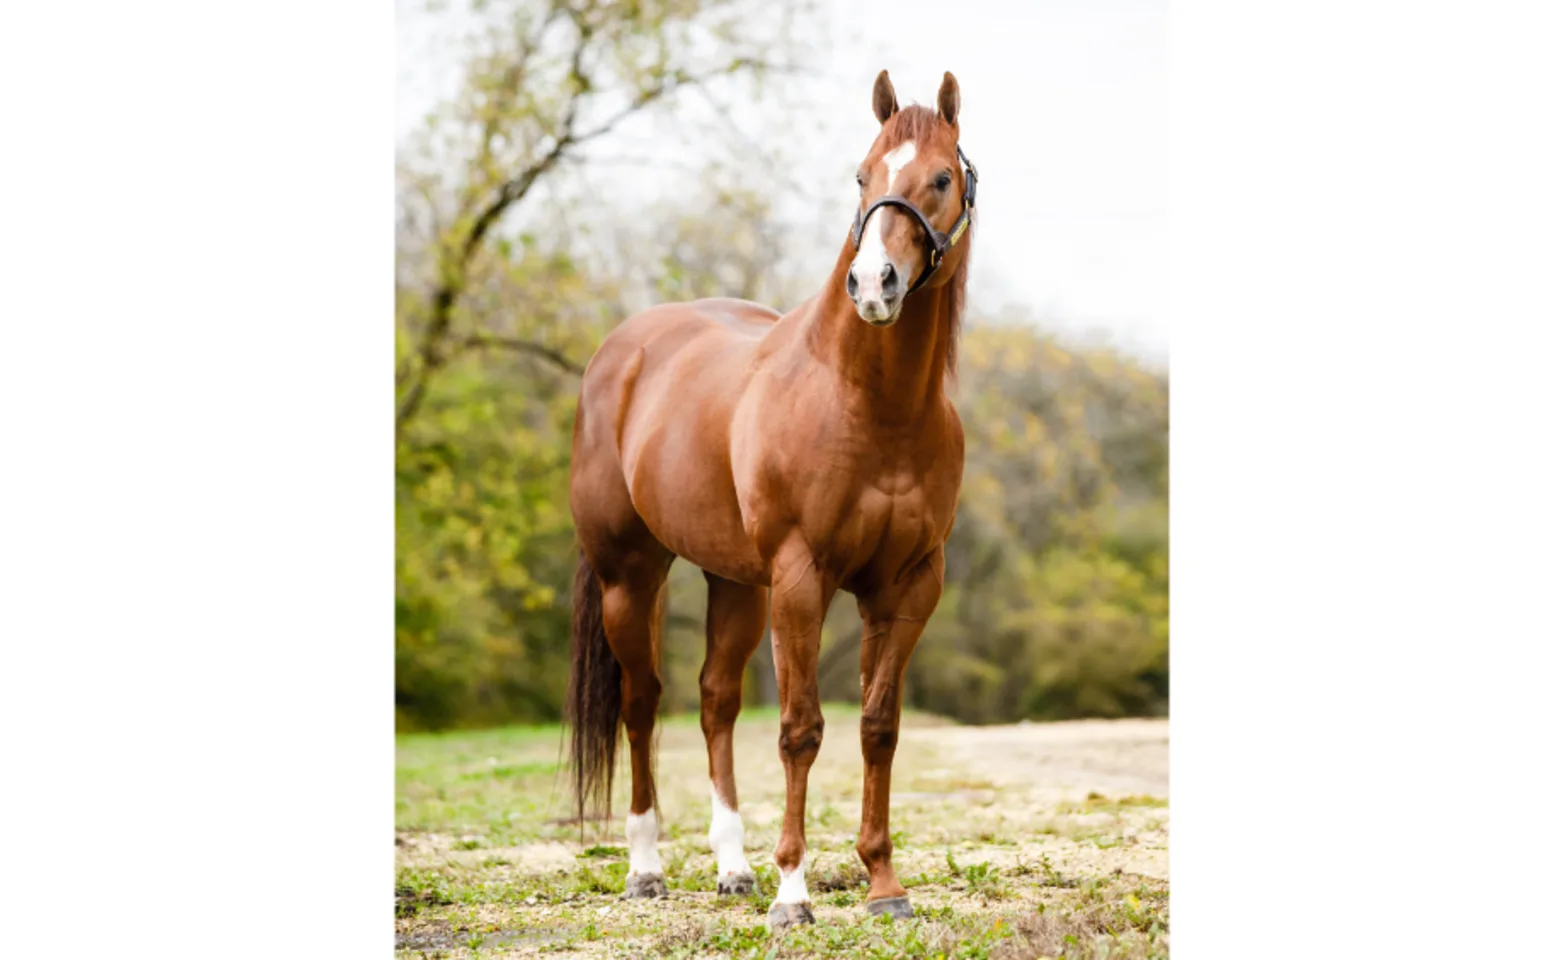 Go To The Gravel, a brown horse standing on grass